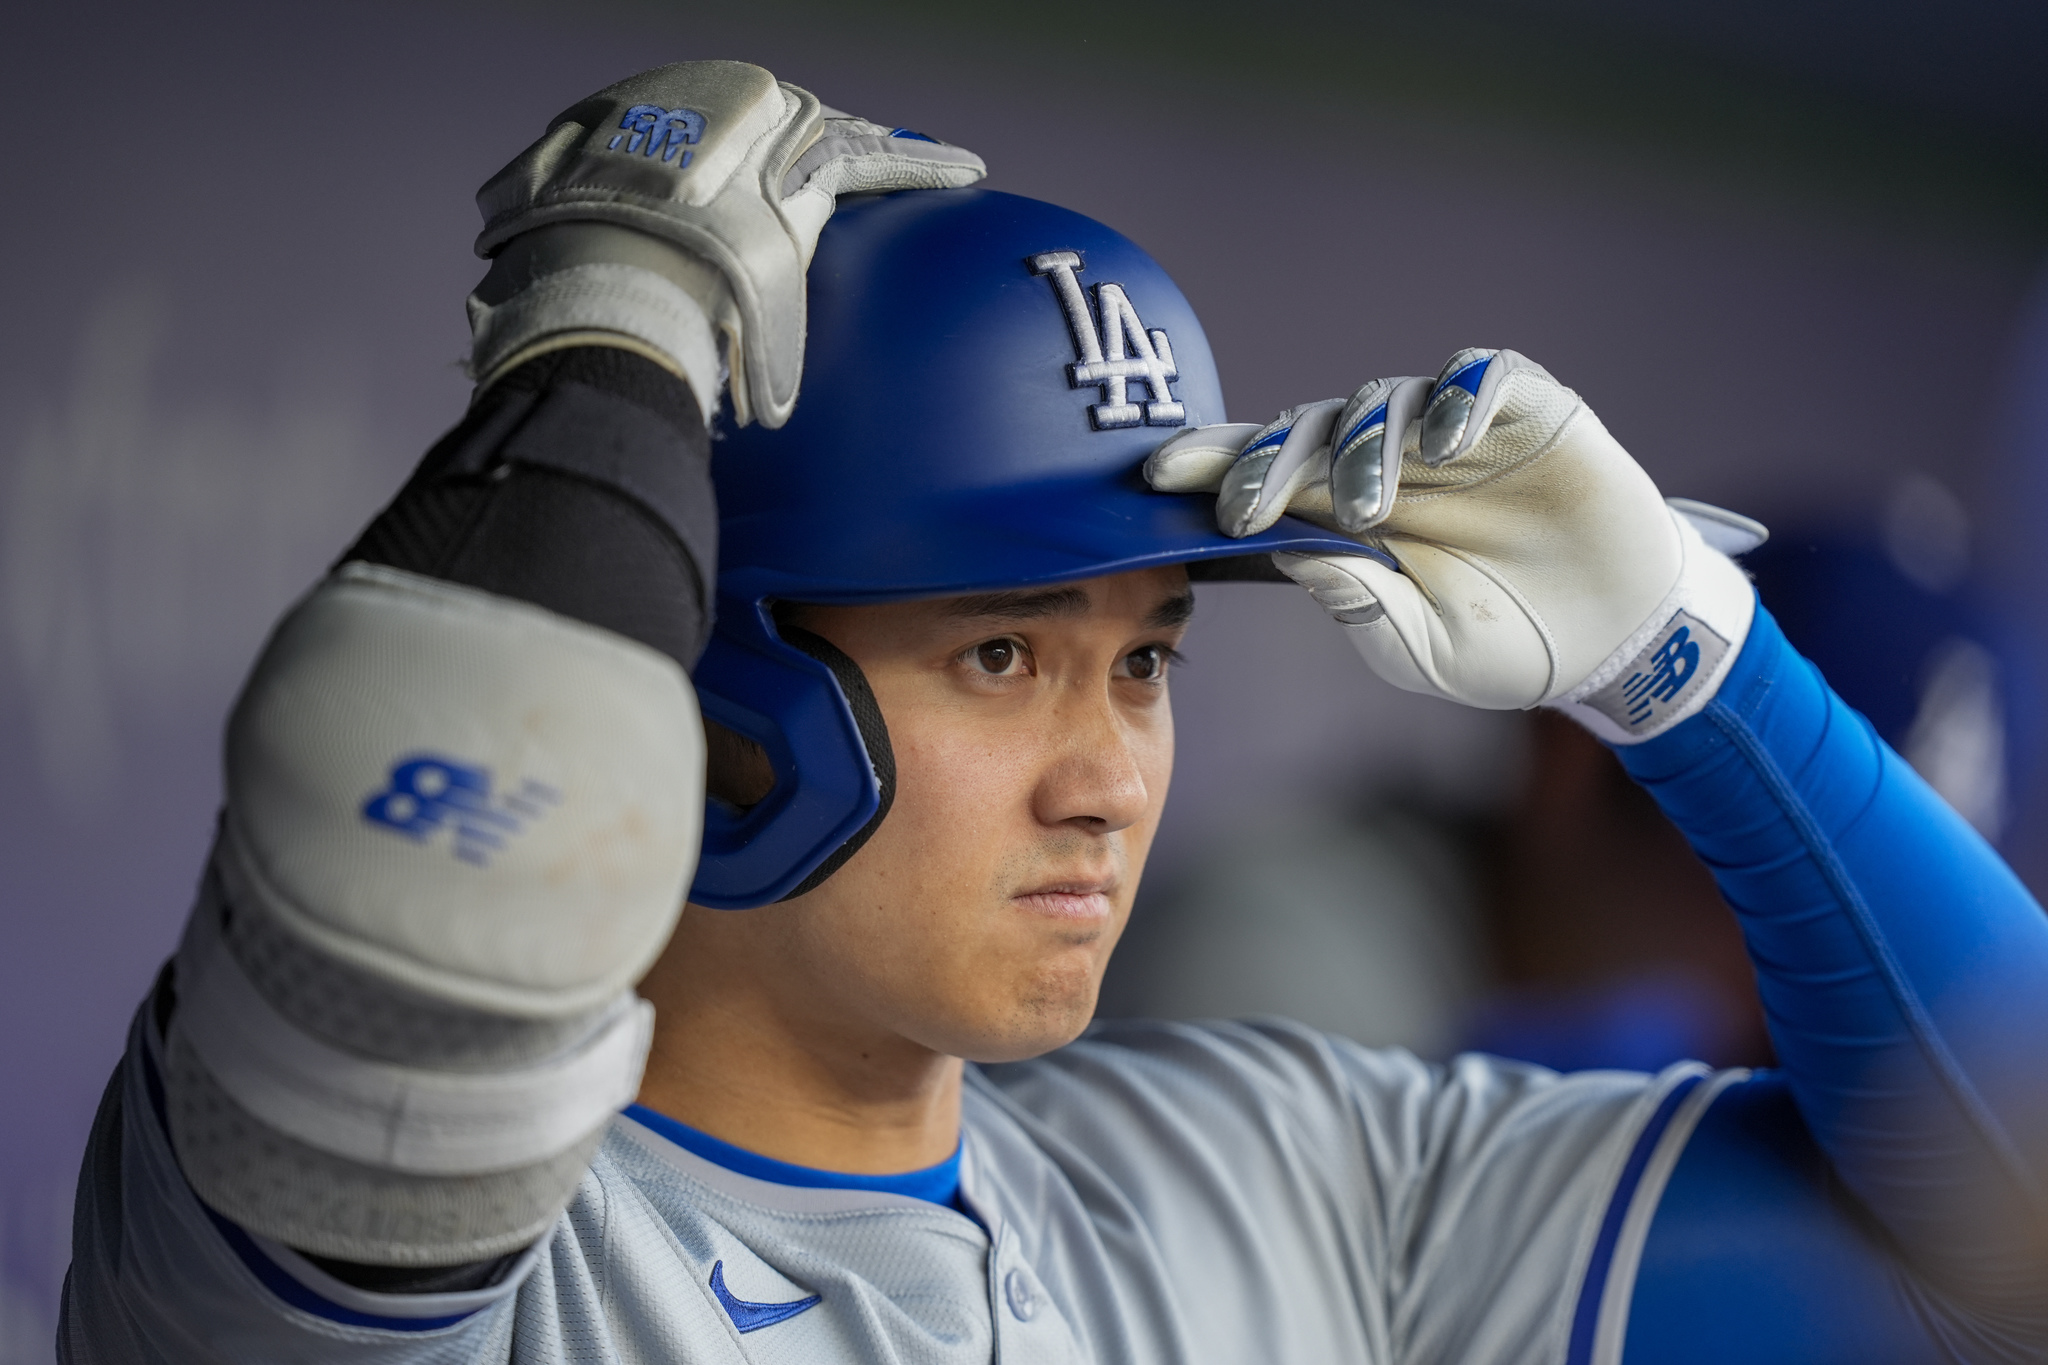 Los Angeles Dodgers designated hitter Shohei Ohtani in the dugout